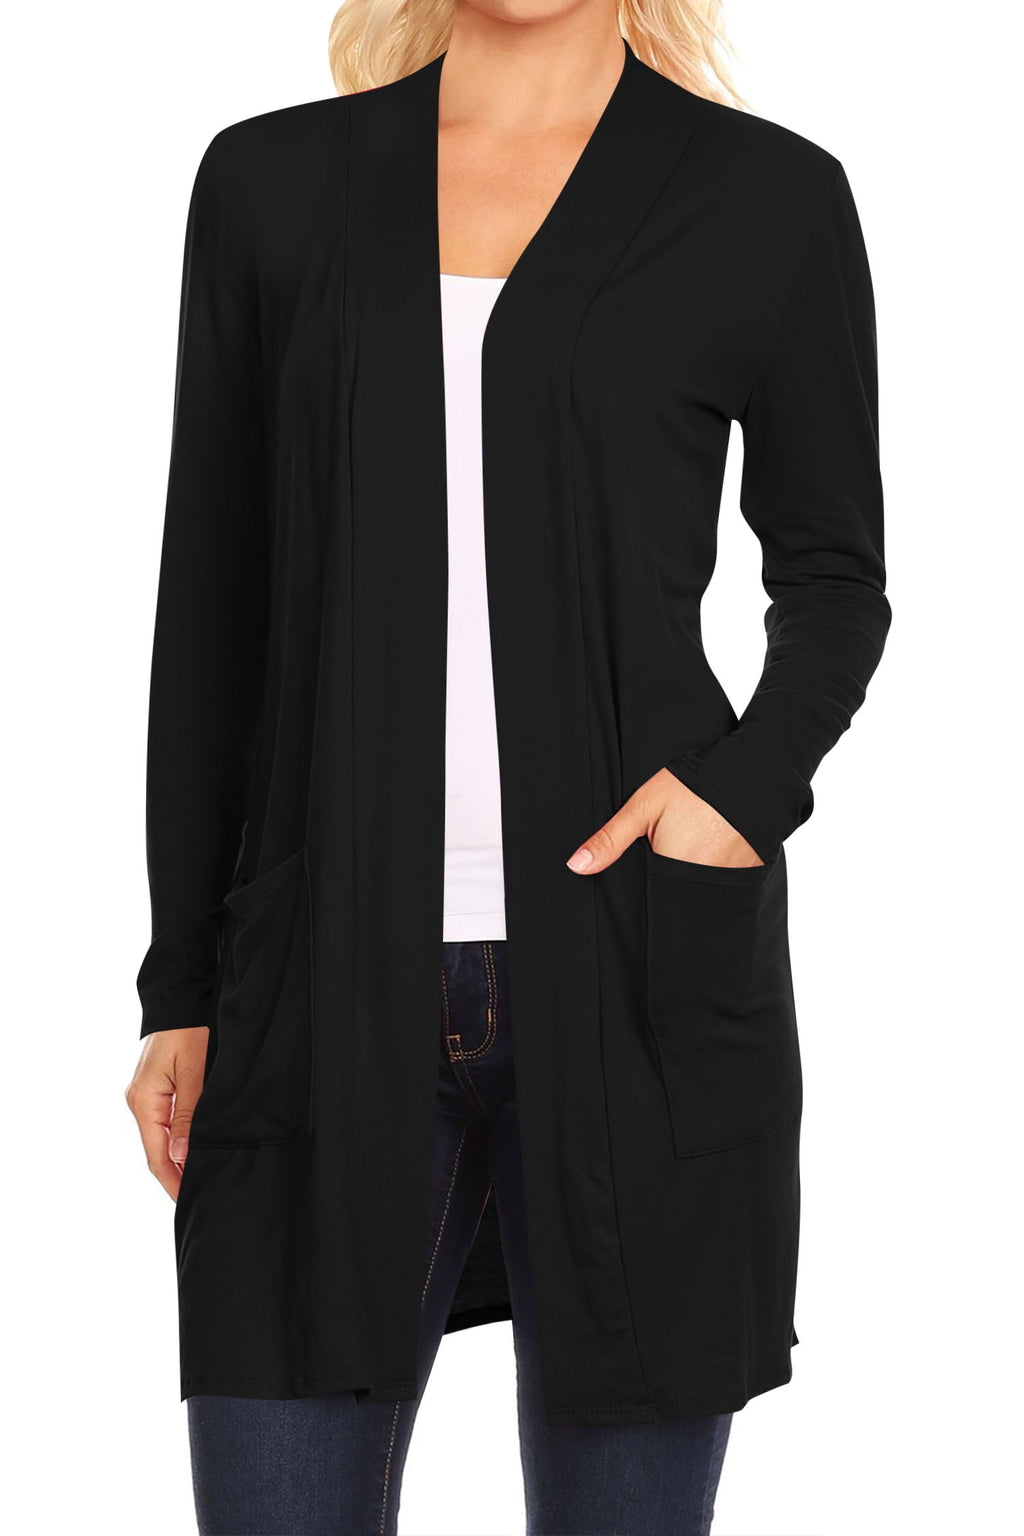 Women's Long Sleeves Loose Fit Open Front Side Pockets Solid Cardigan Made in USA - image 1 of 4